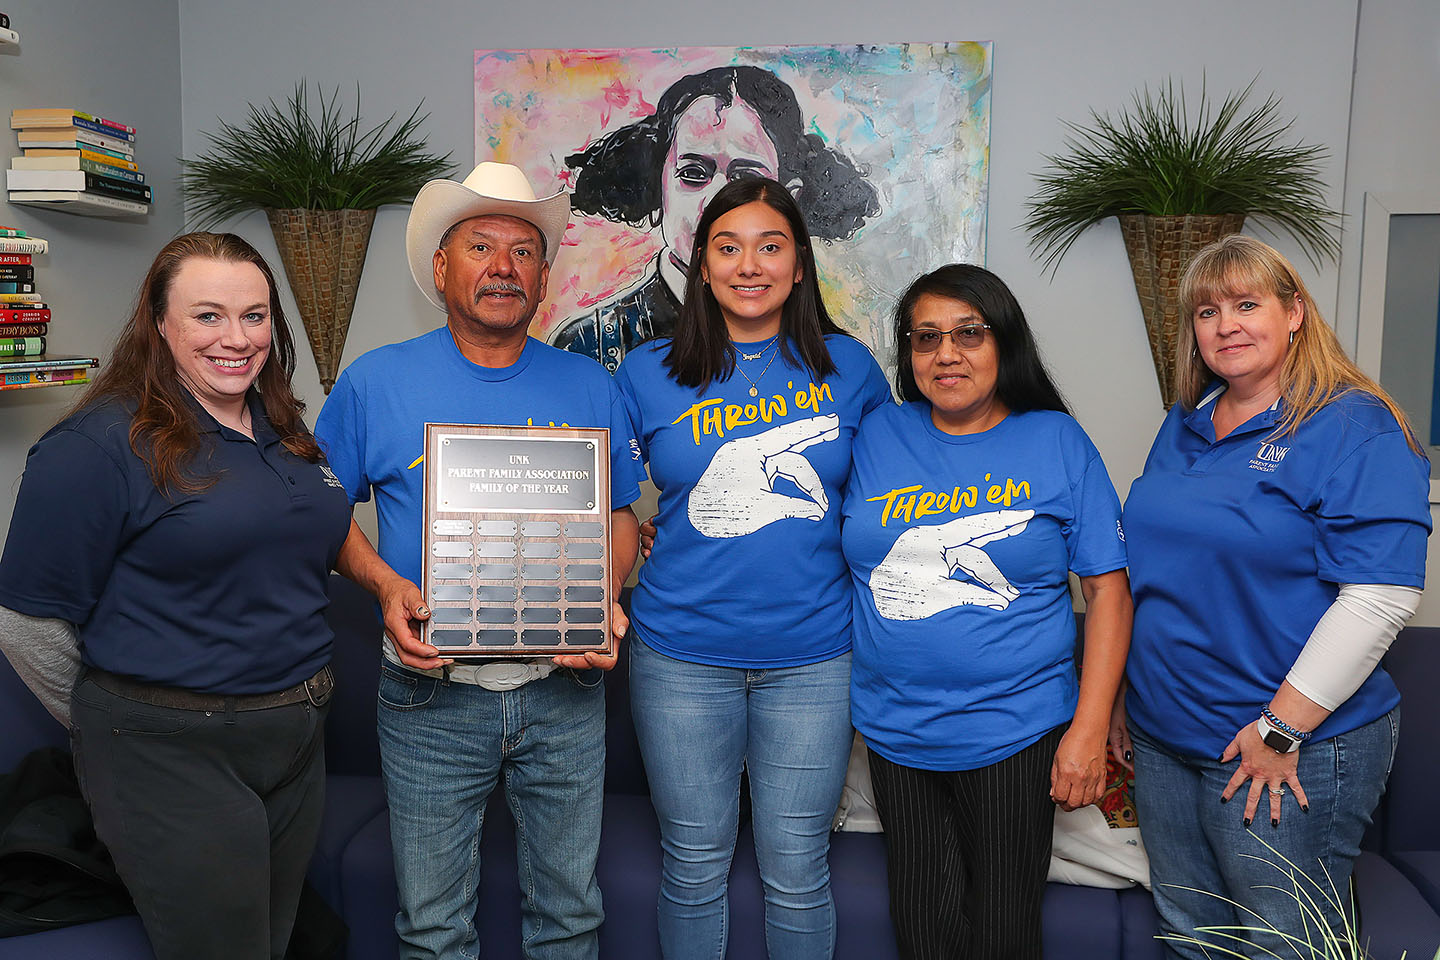 Juana Perez and her parents Lorenzo and Flora pose for a photo with UNK Office of Student and Family Transitions Assistant Director Kelly Tuttle Krahling, left, and UNK Parent and Family Association Chairperson Terri Lovitt, right. The Perez family was recognized as the UNK Family of the Year. (Photo by Erika Pritchard, UNK Communications)